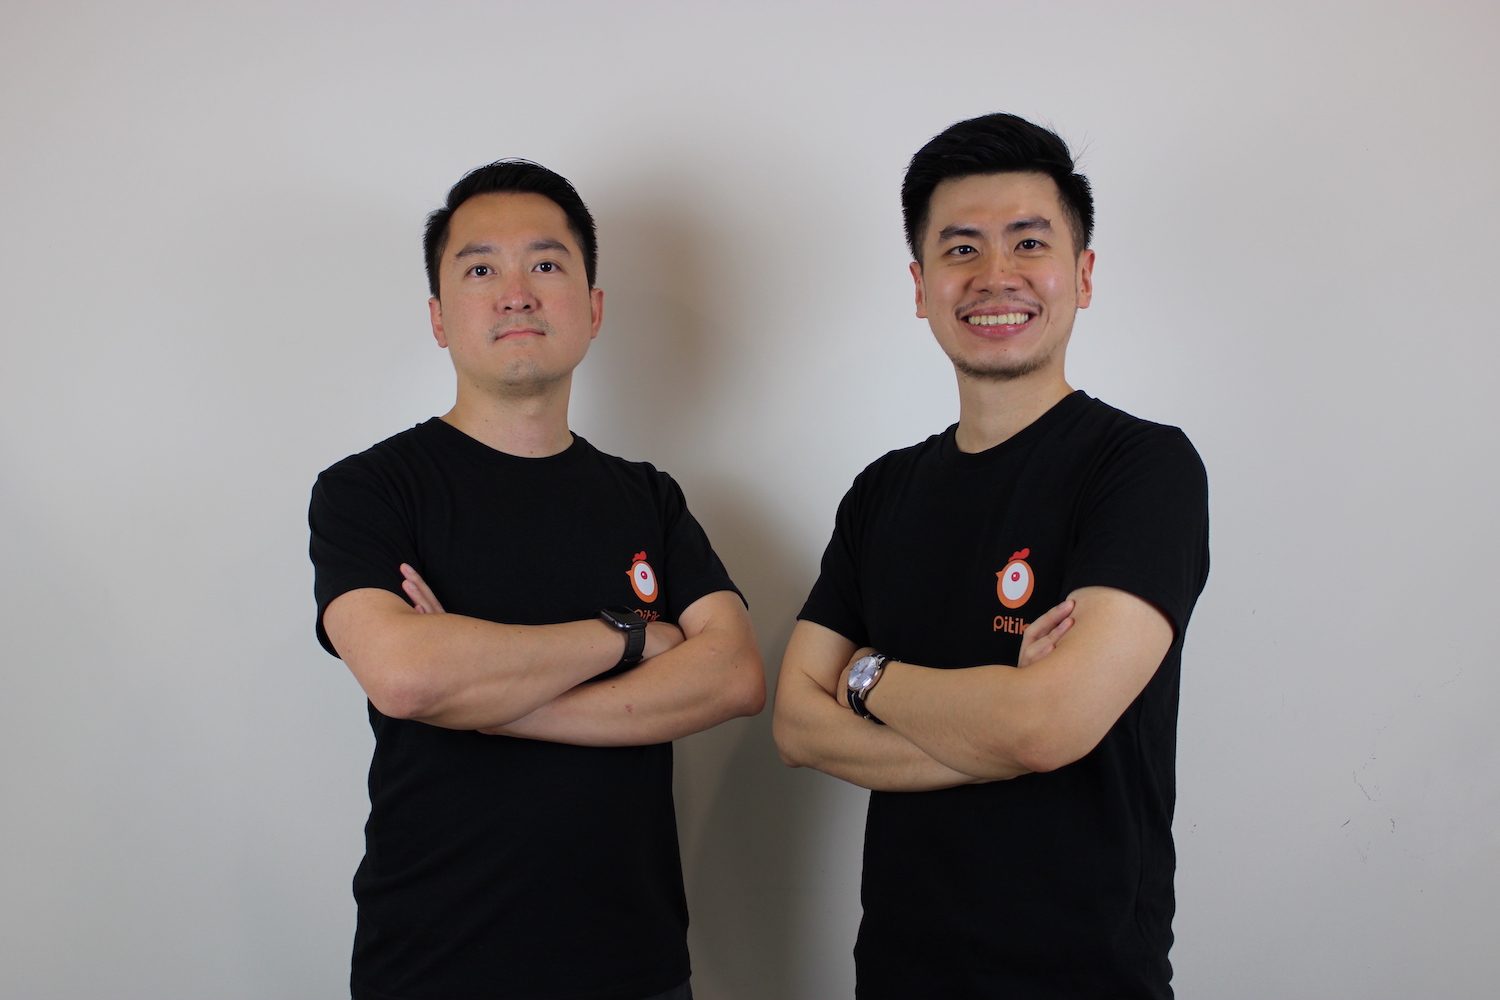 Indonesia's poultry tech startup Pitik raises $14m in Series A round led by Alpha JWC